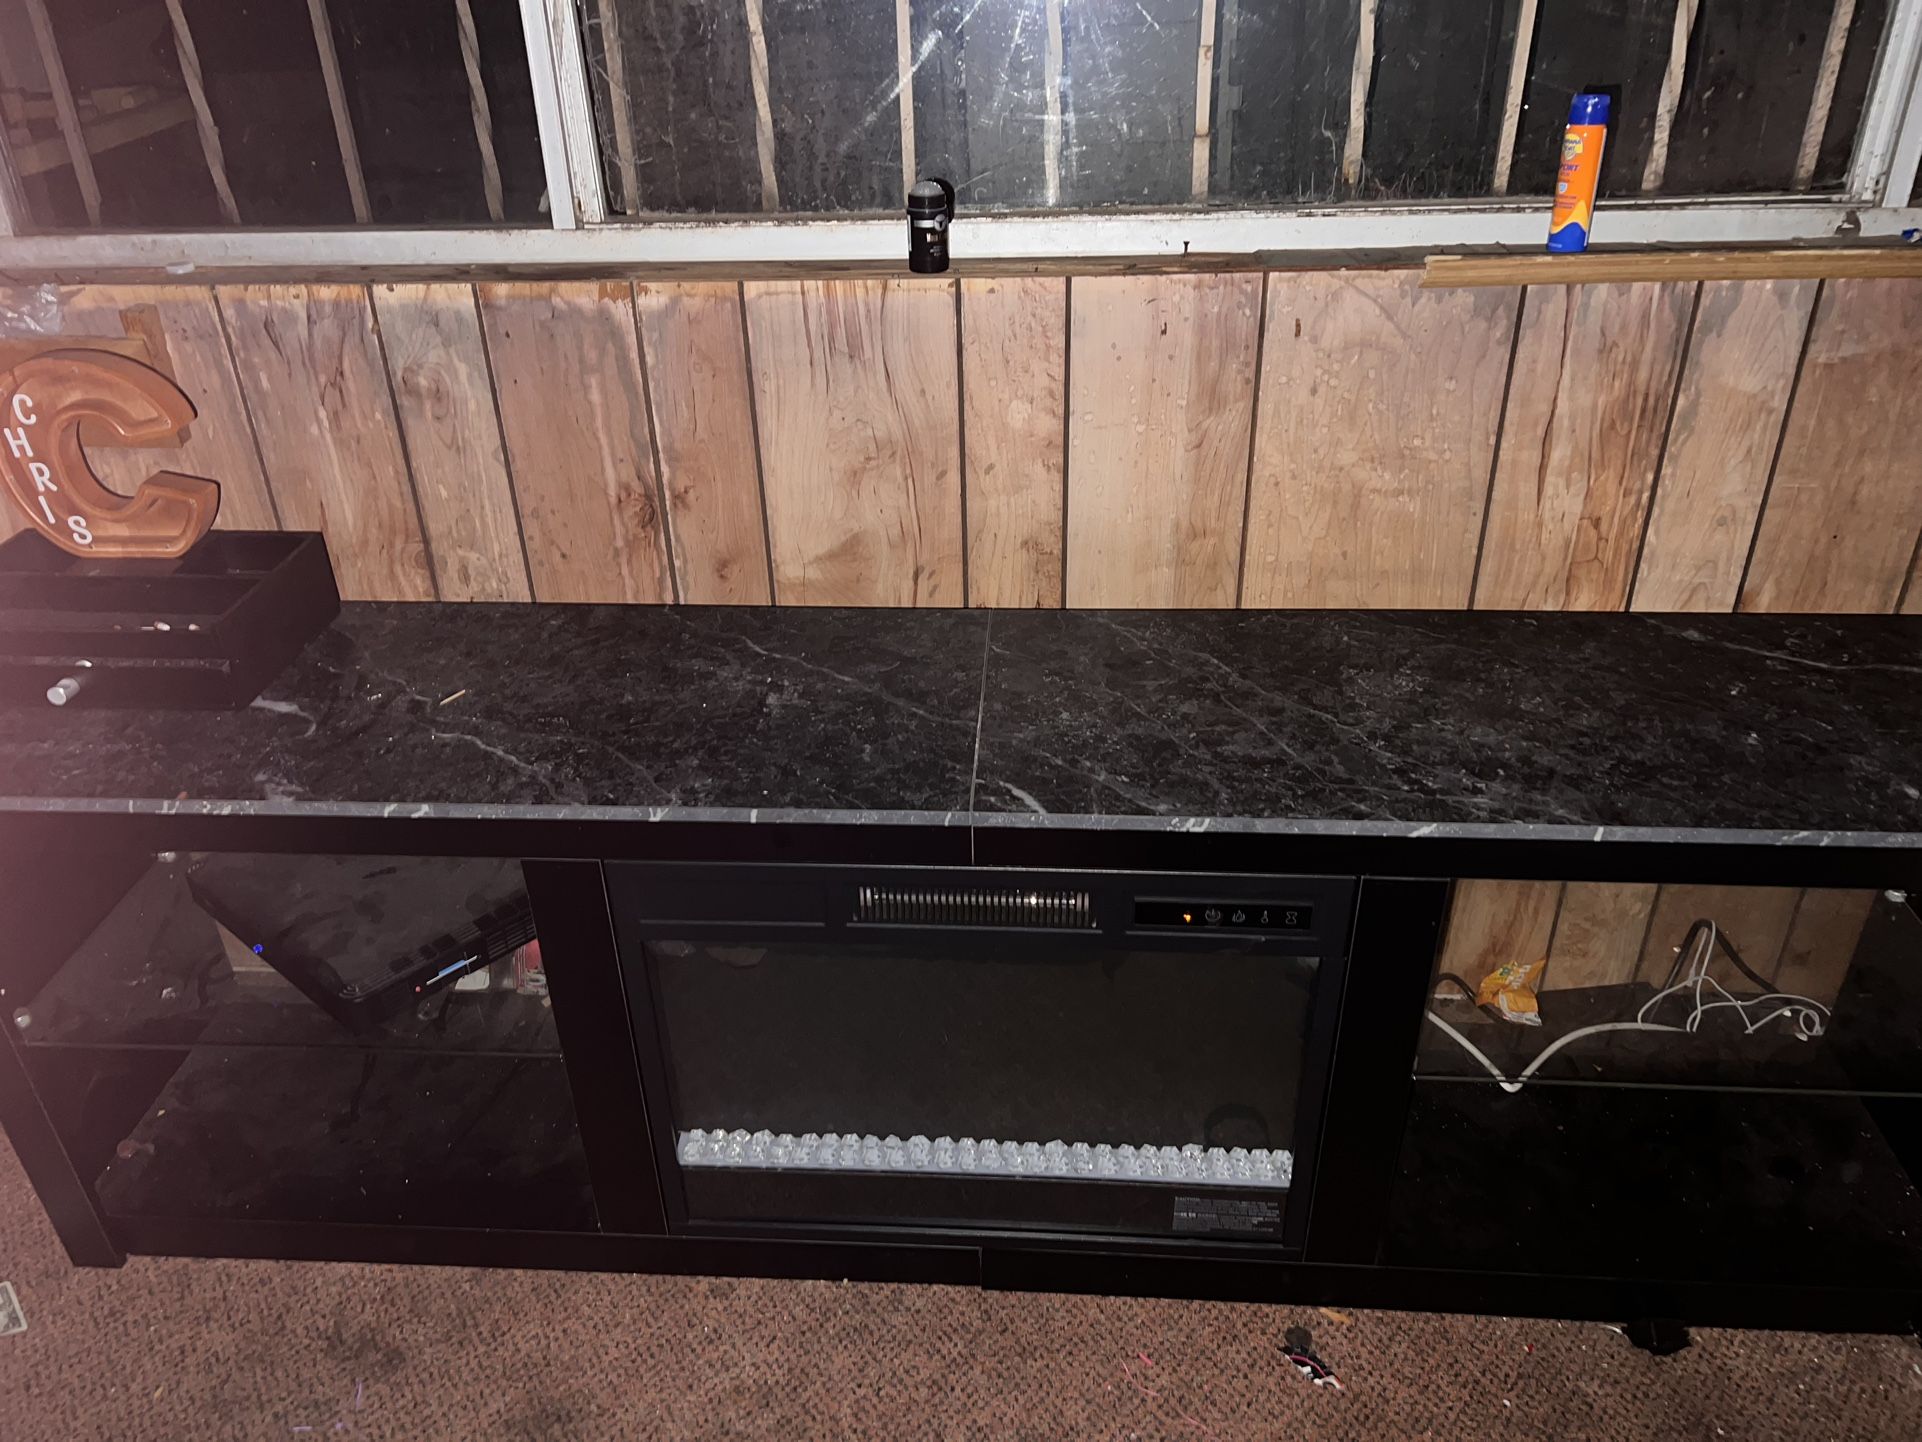 Tv Stand With Fire Place 